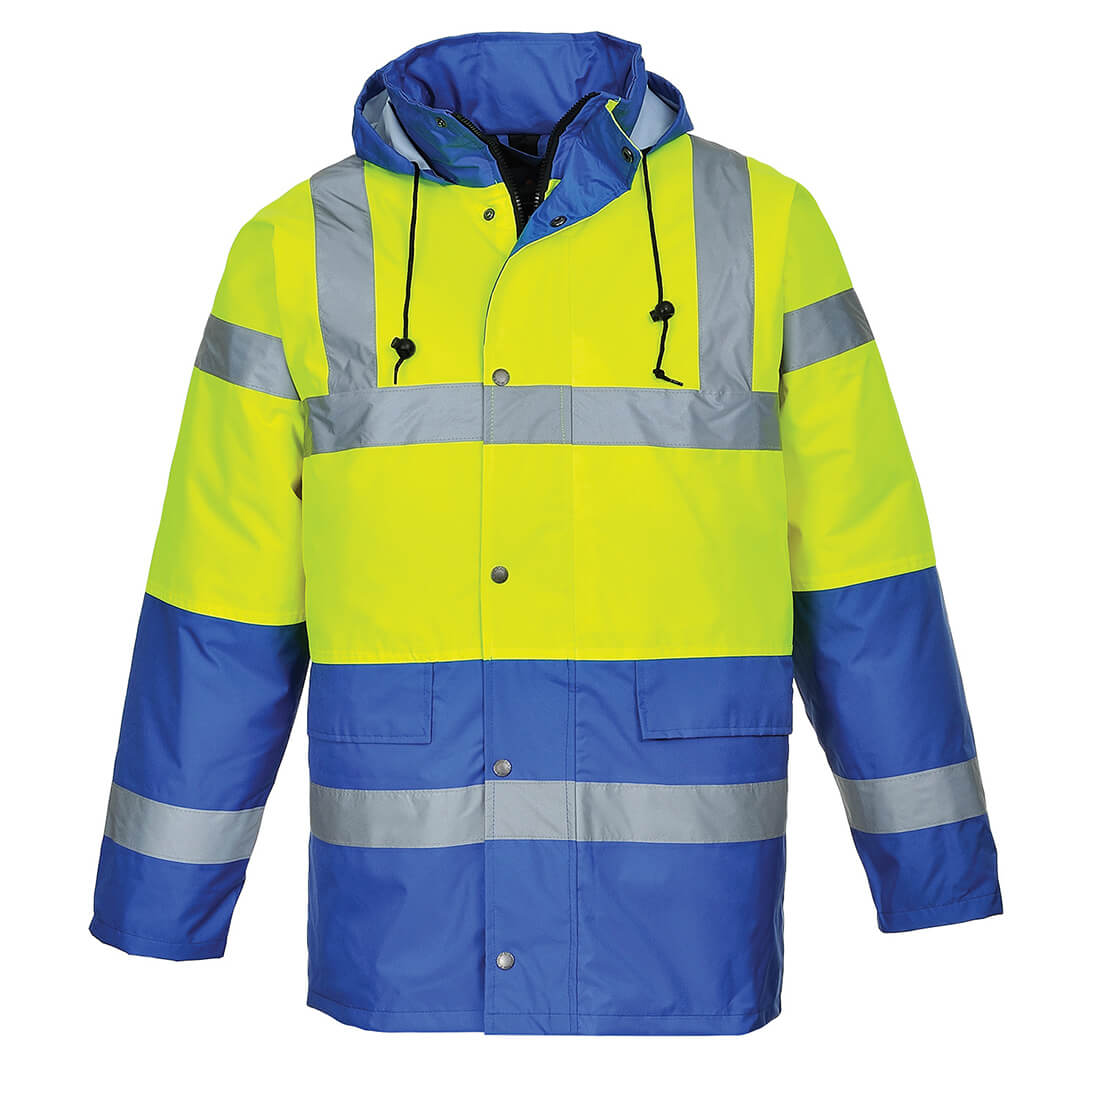 Image of Oxford Weave 300D Class 3 Hi Vis Contrast Traffic Jacket Yellow / Royal Blue XL